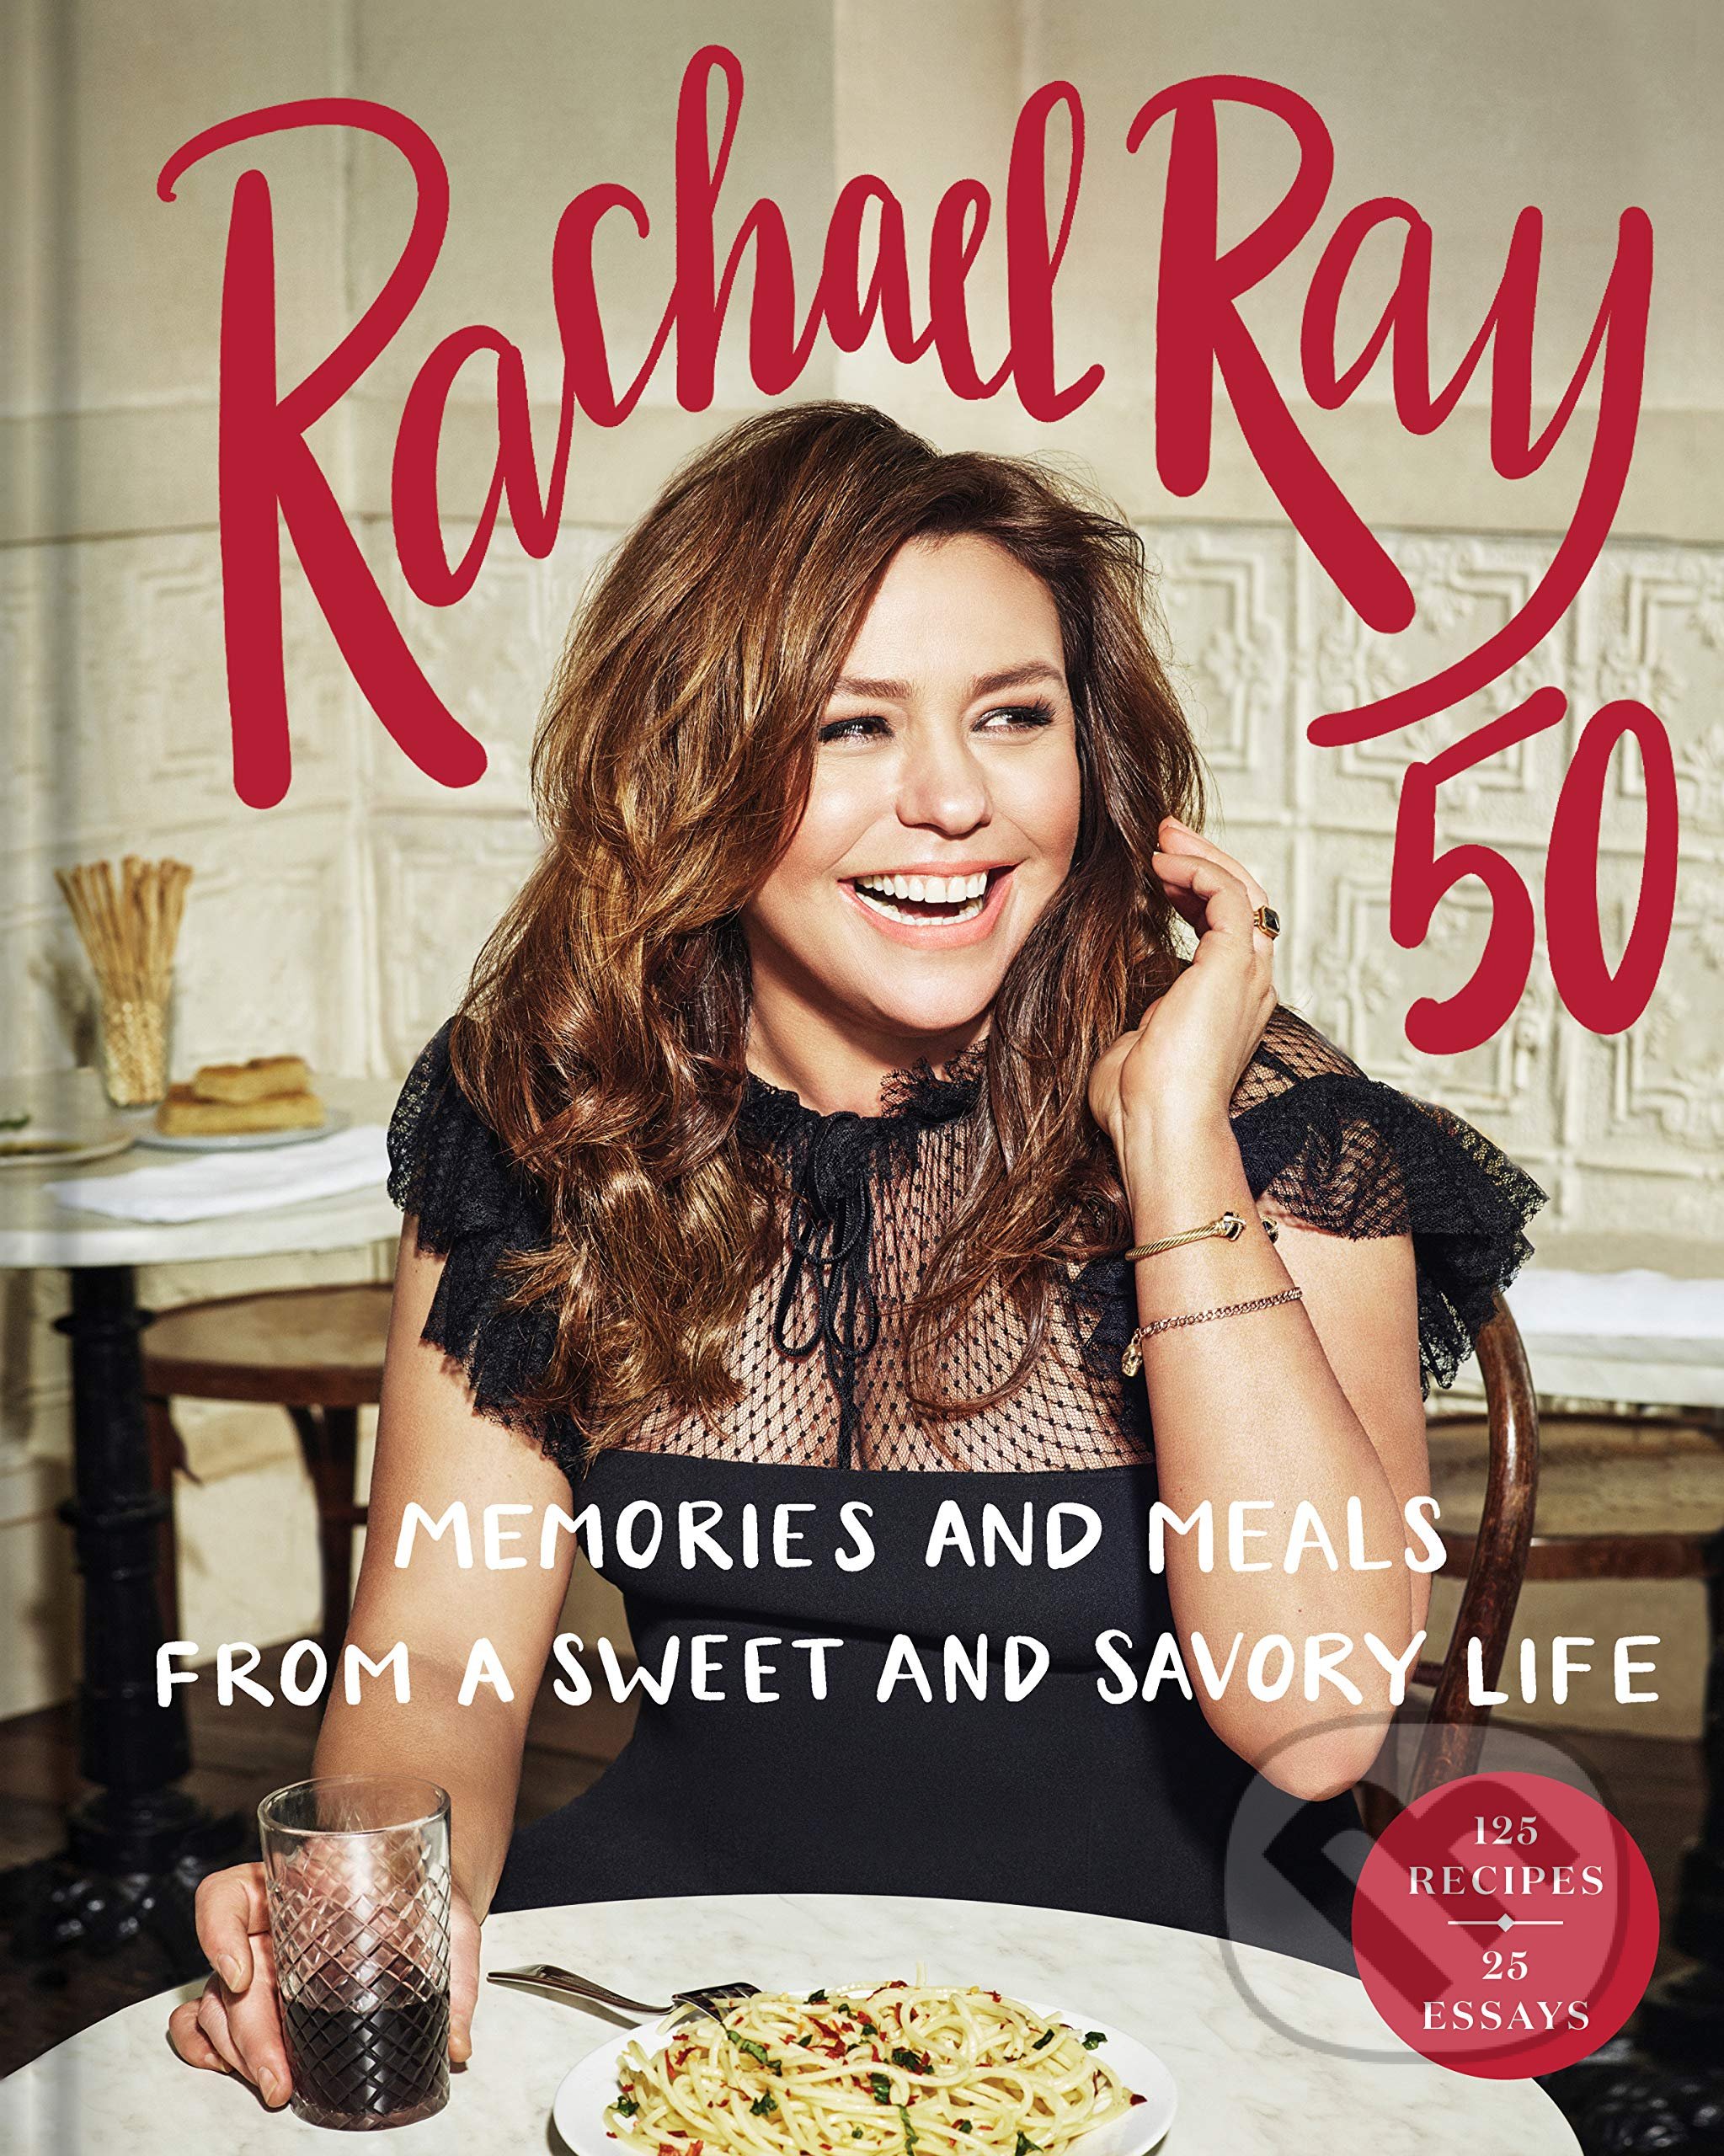 Rachael Ray 50: Memories and Meals from a Sweet and Savory Life - Rachael Ray, Crown Books, 2019